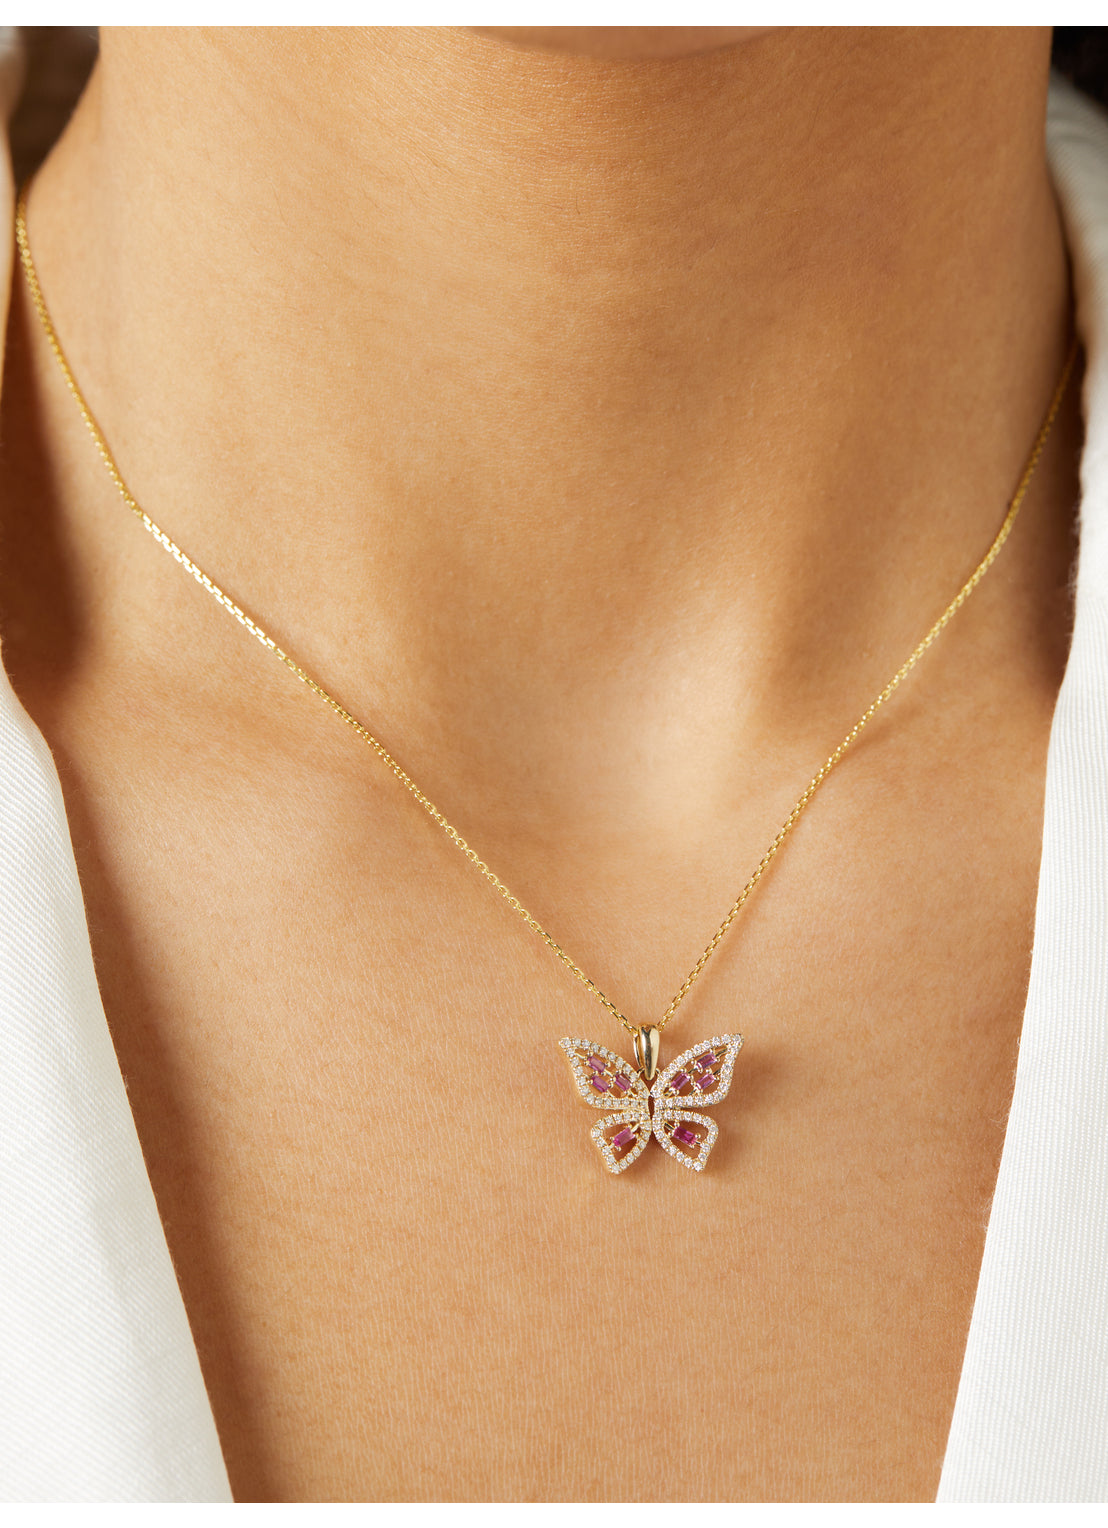 Yellow gold pendant, 0.19 ct pink sapphire, butterfly kisses